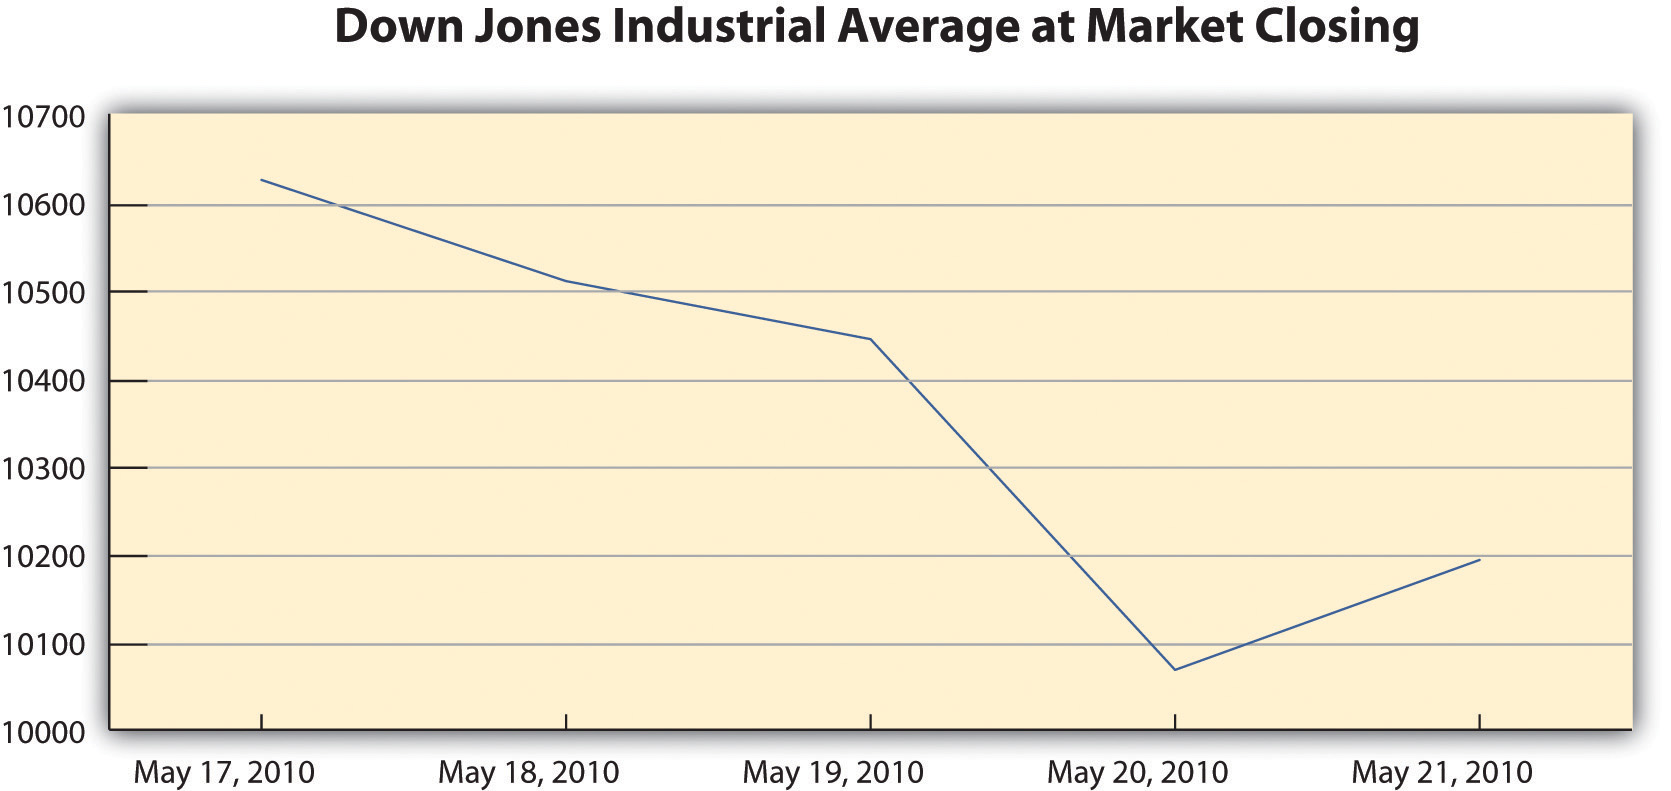 Down Jones Industrial Average at Market Closing went down significantly from May 17, 2010 to May 20, 2010, and then raised again at May 21, 2010